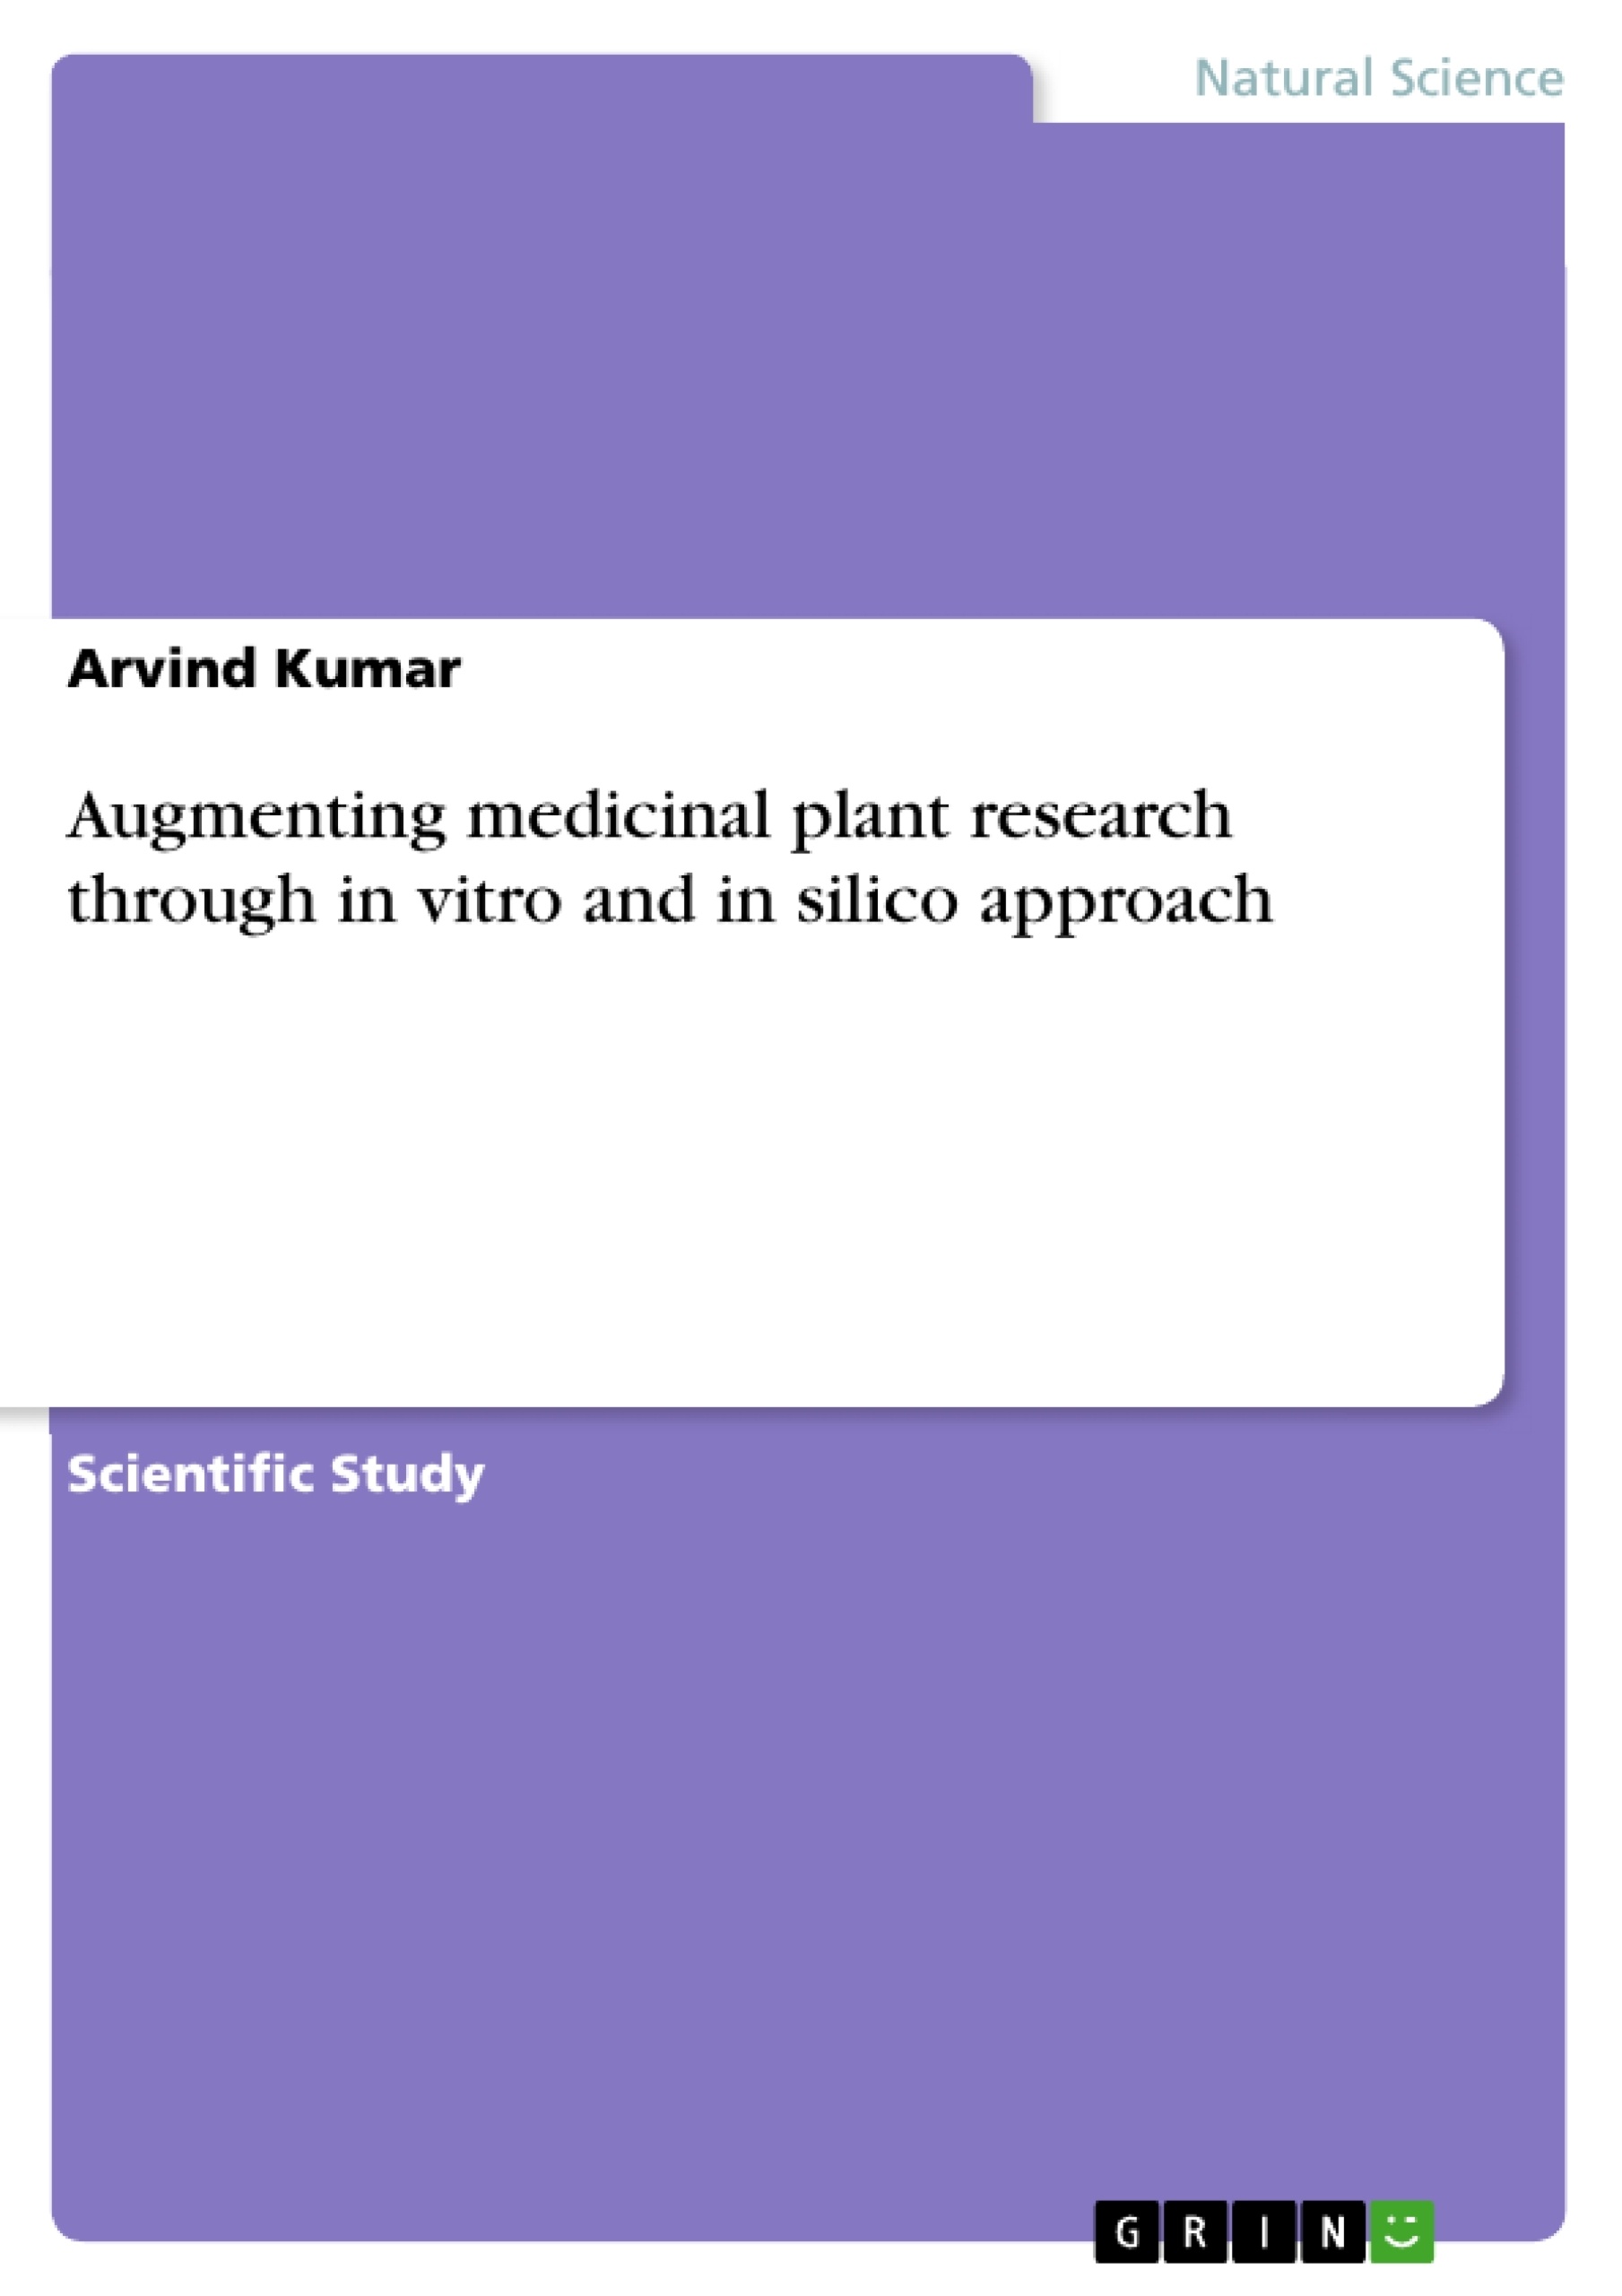 Title: Augmenting medicinal plant research through in vitro and in silico approach